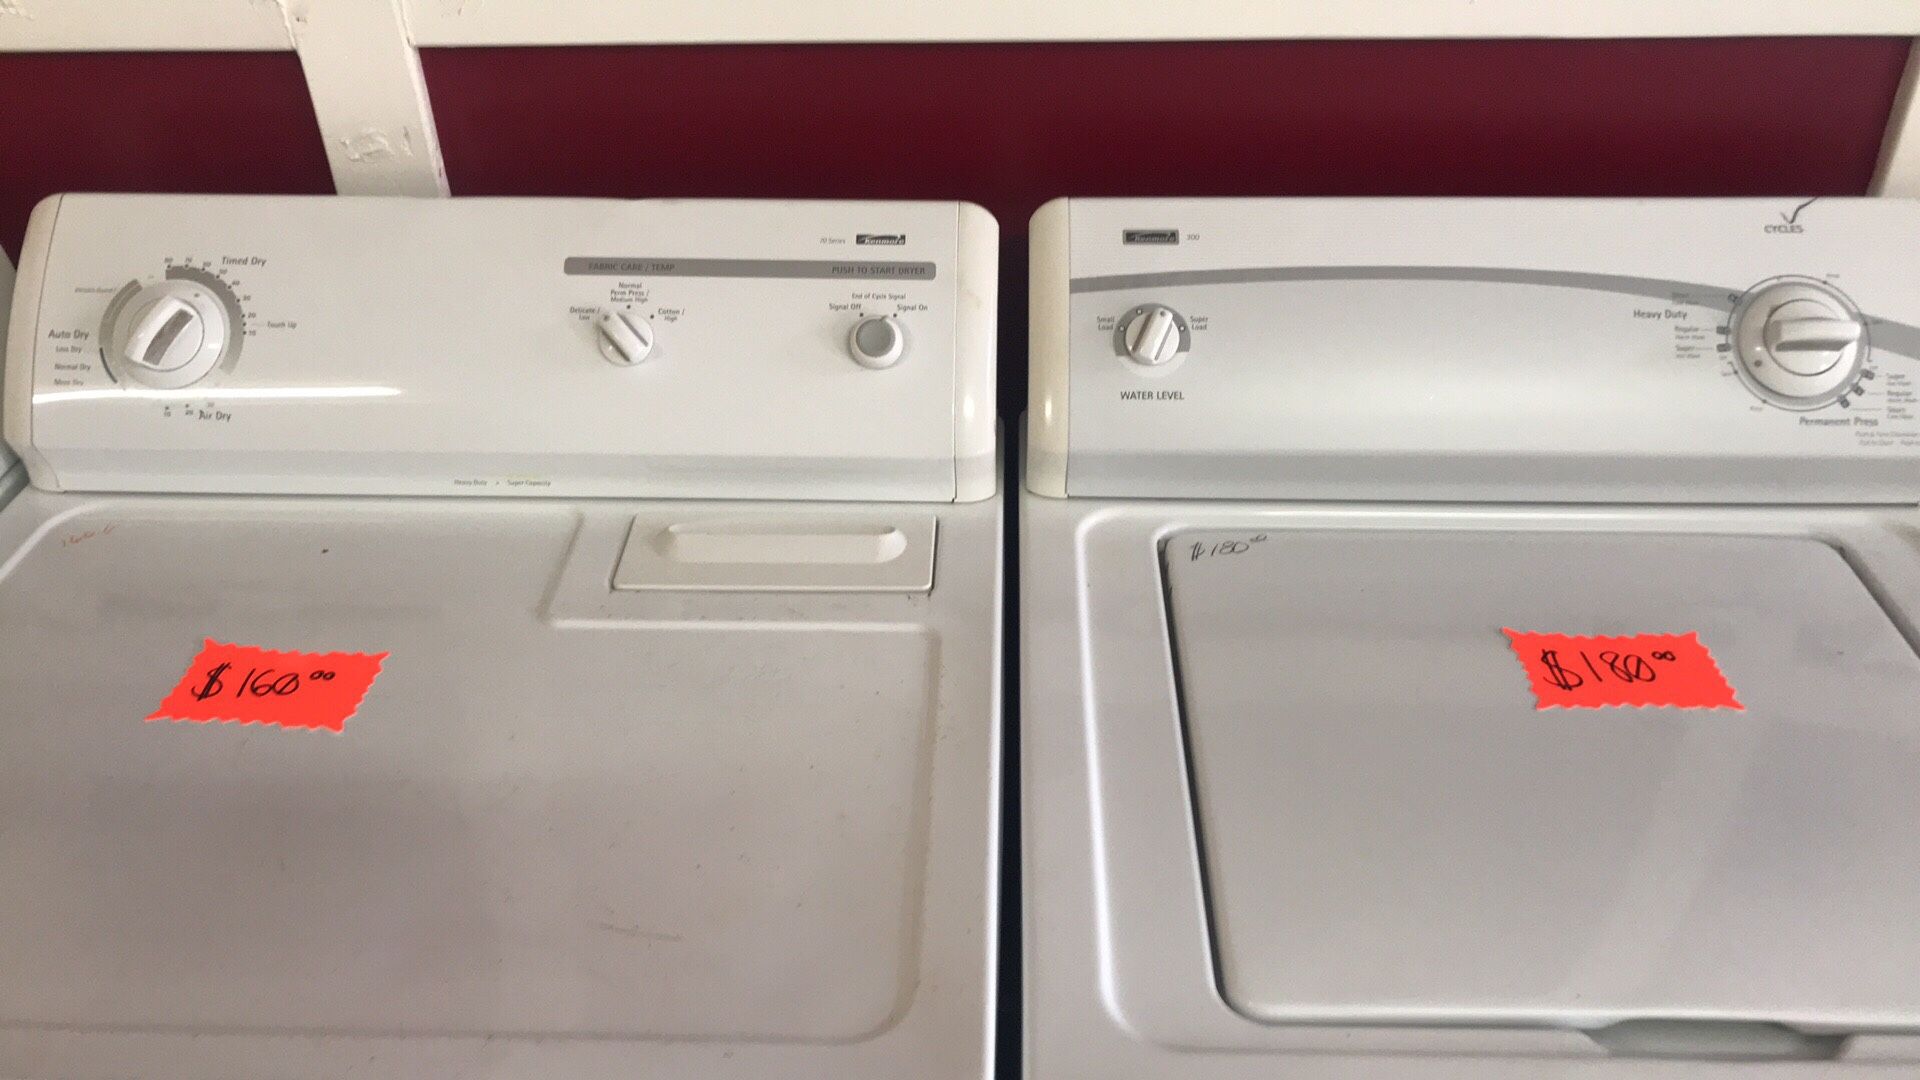 washer and gas dryer Kenmore super capacity plus all working $300 can deliver If you're not too far